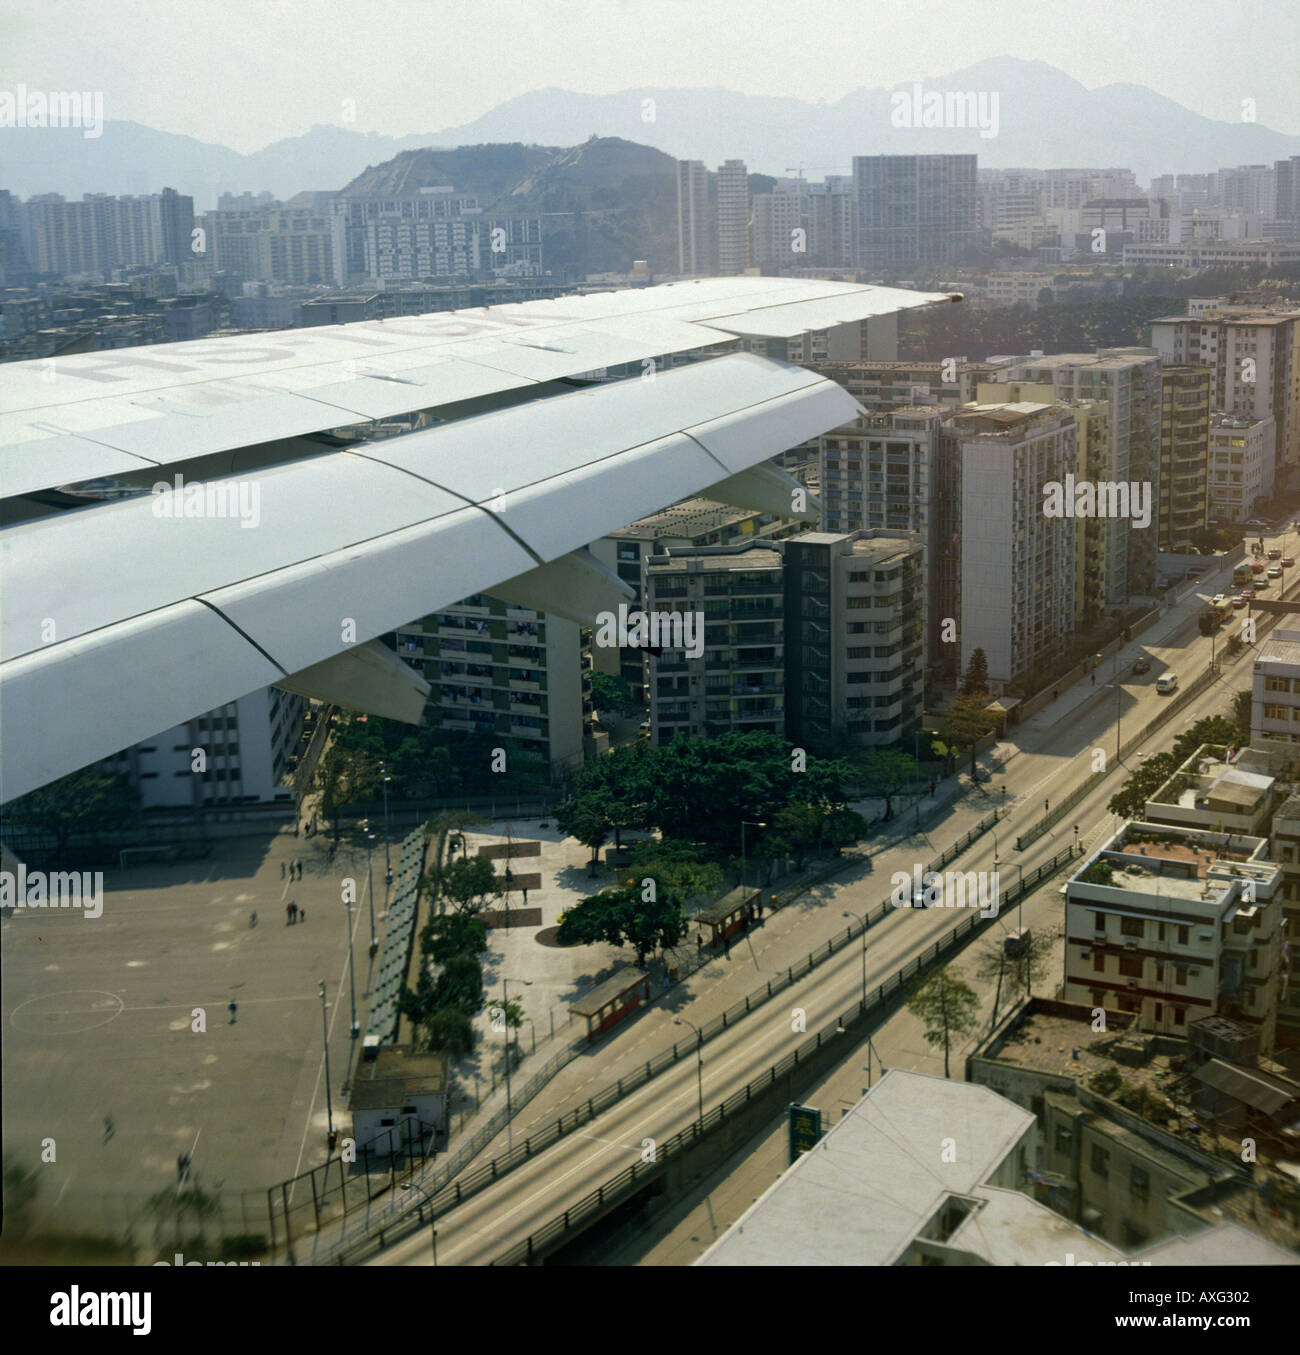 View from an airliner over the aircraft’s wing with flaps down on one of last flights to old Kai Tak airport Hong Kong Stock Photo